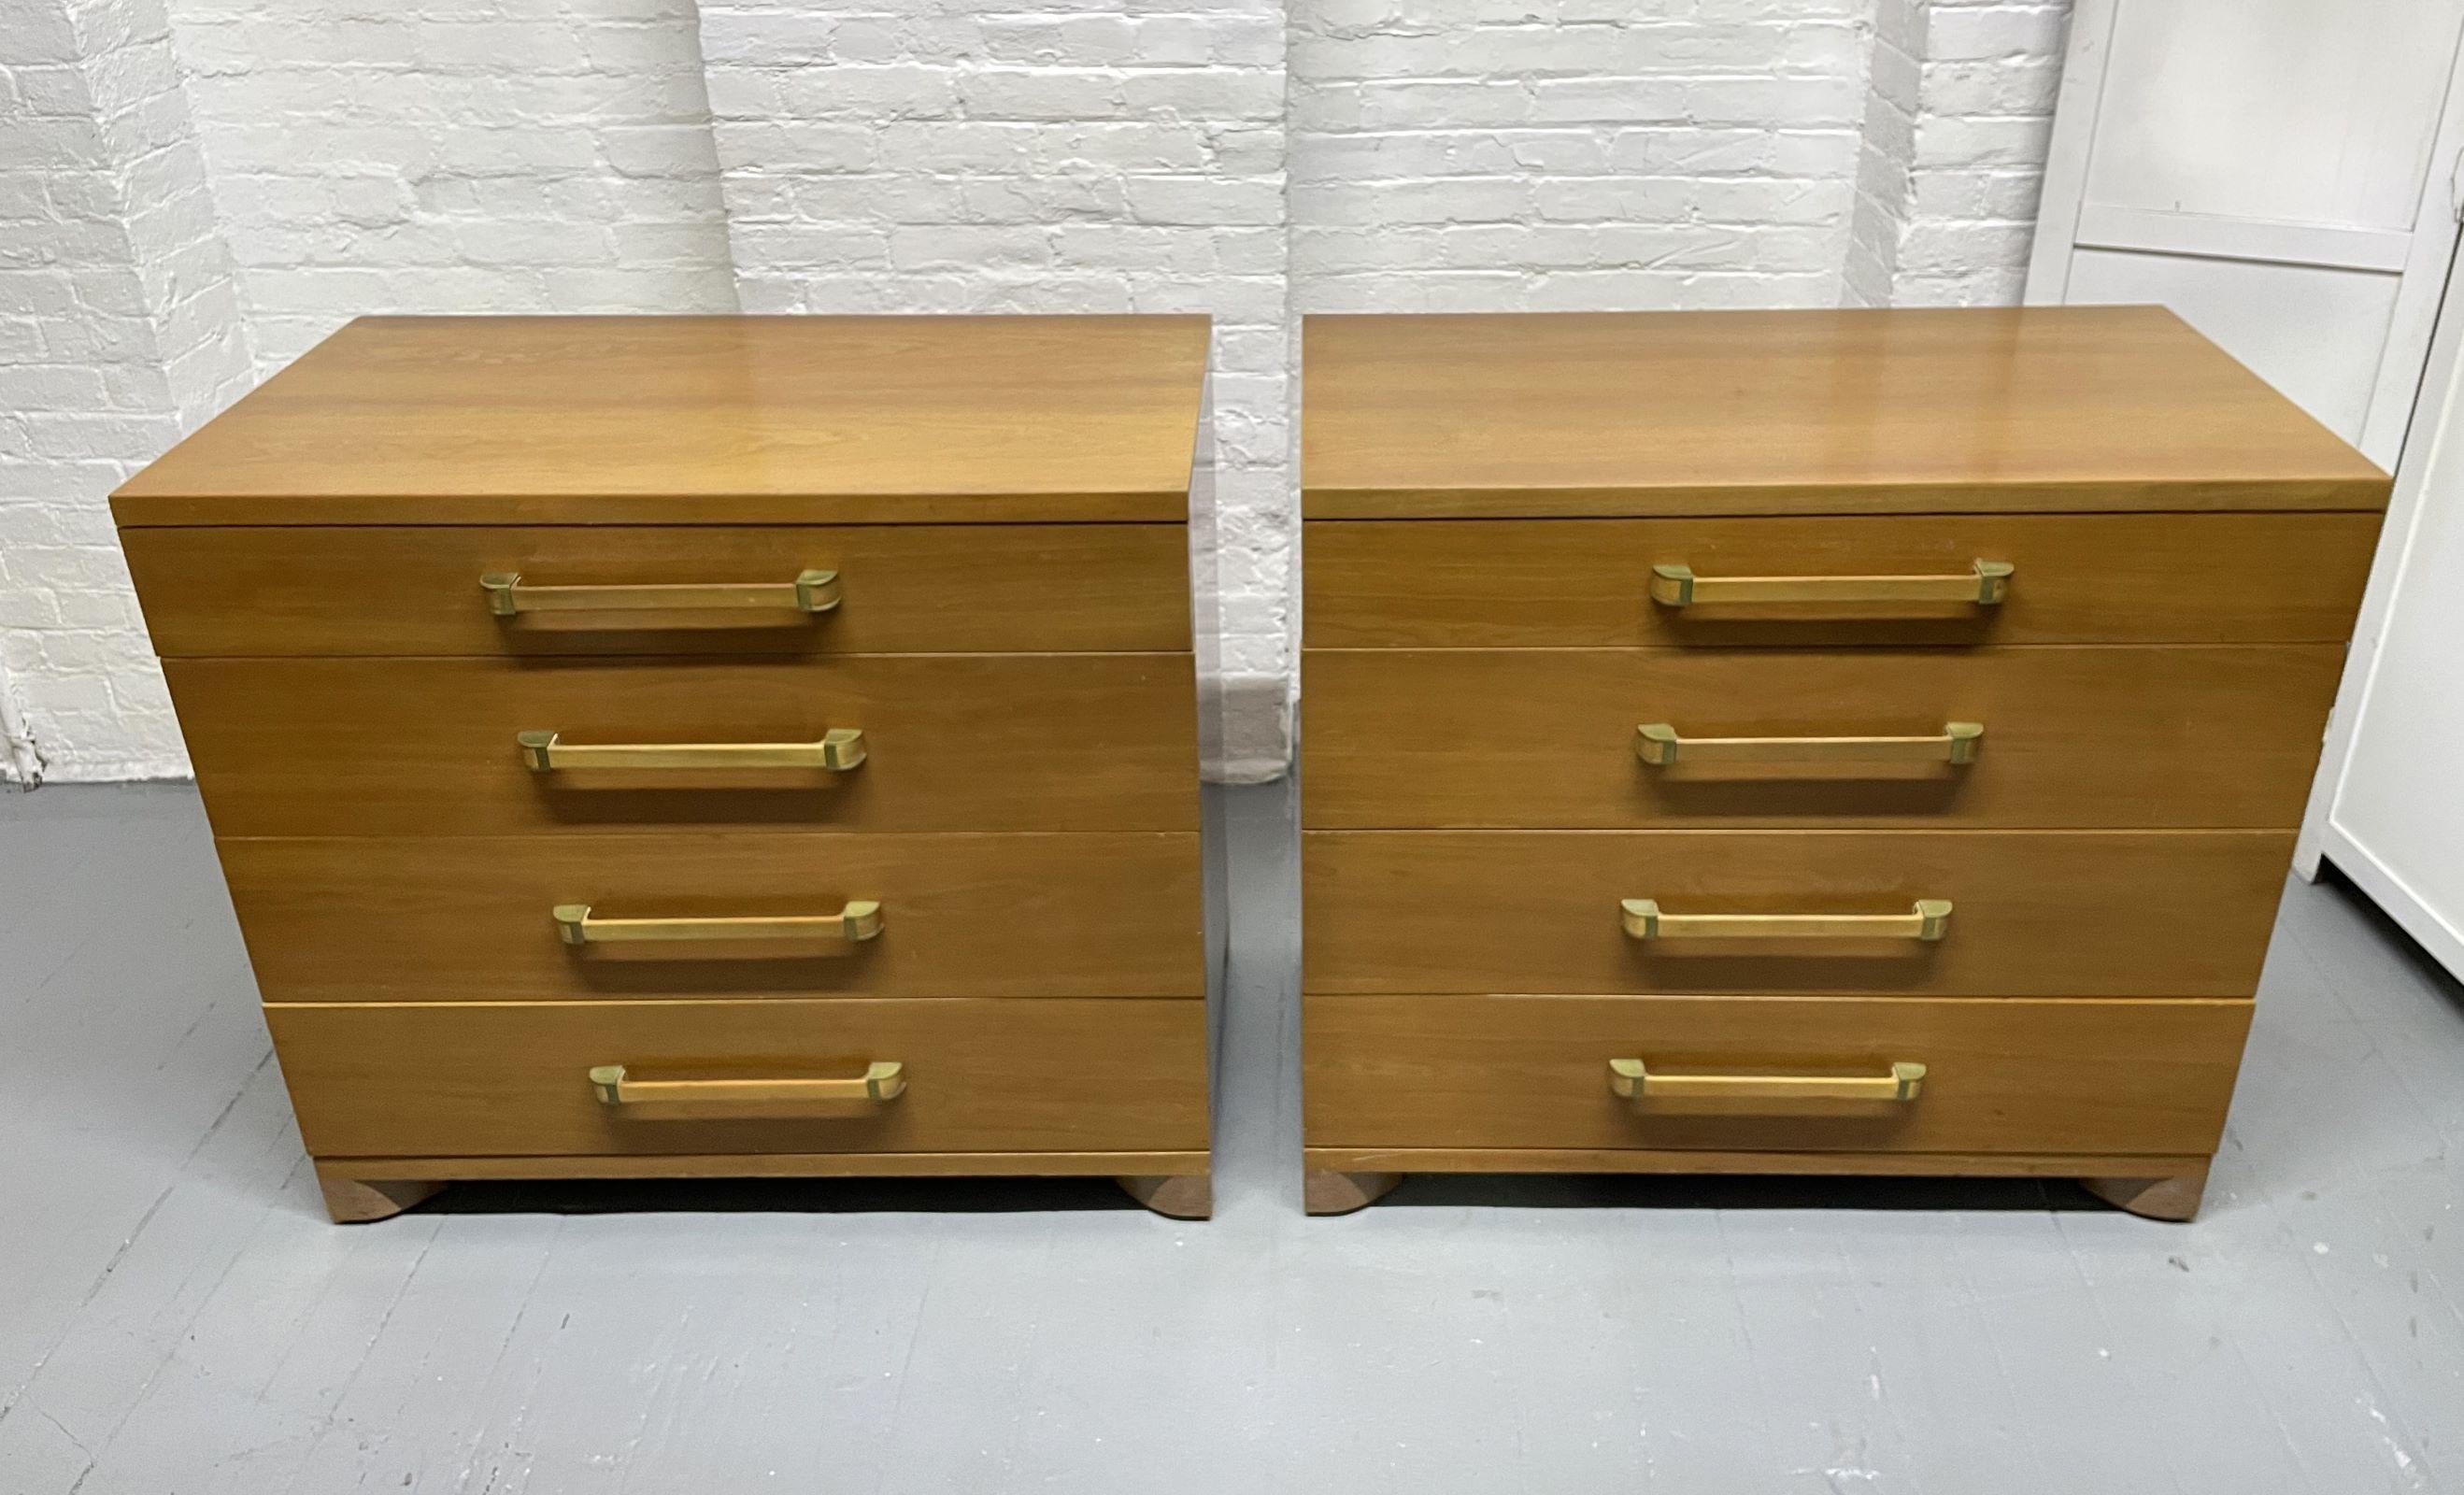 Pair John Widdicomb Walnut and Brass Chests.  The chests are walnut with four pull-out drawers.  The handles have brass trim.  Well made and sturdy.